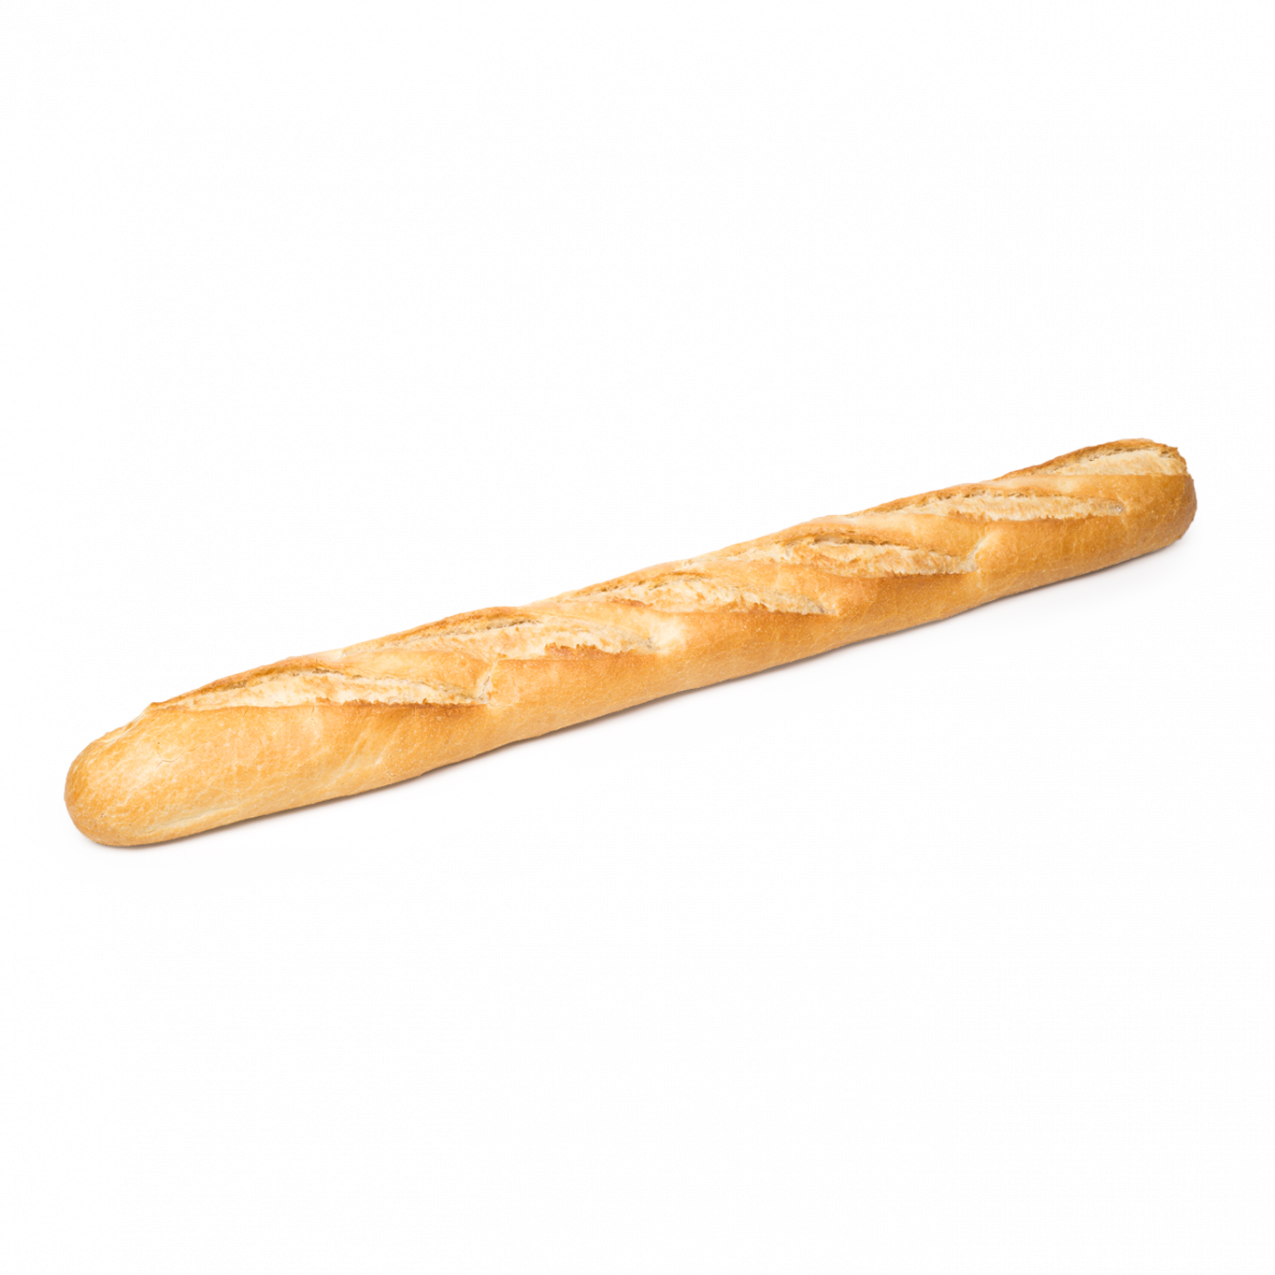 Classic Large Baguette 290g - Pre-baked bread and frozen pastries